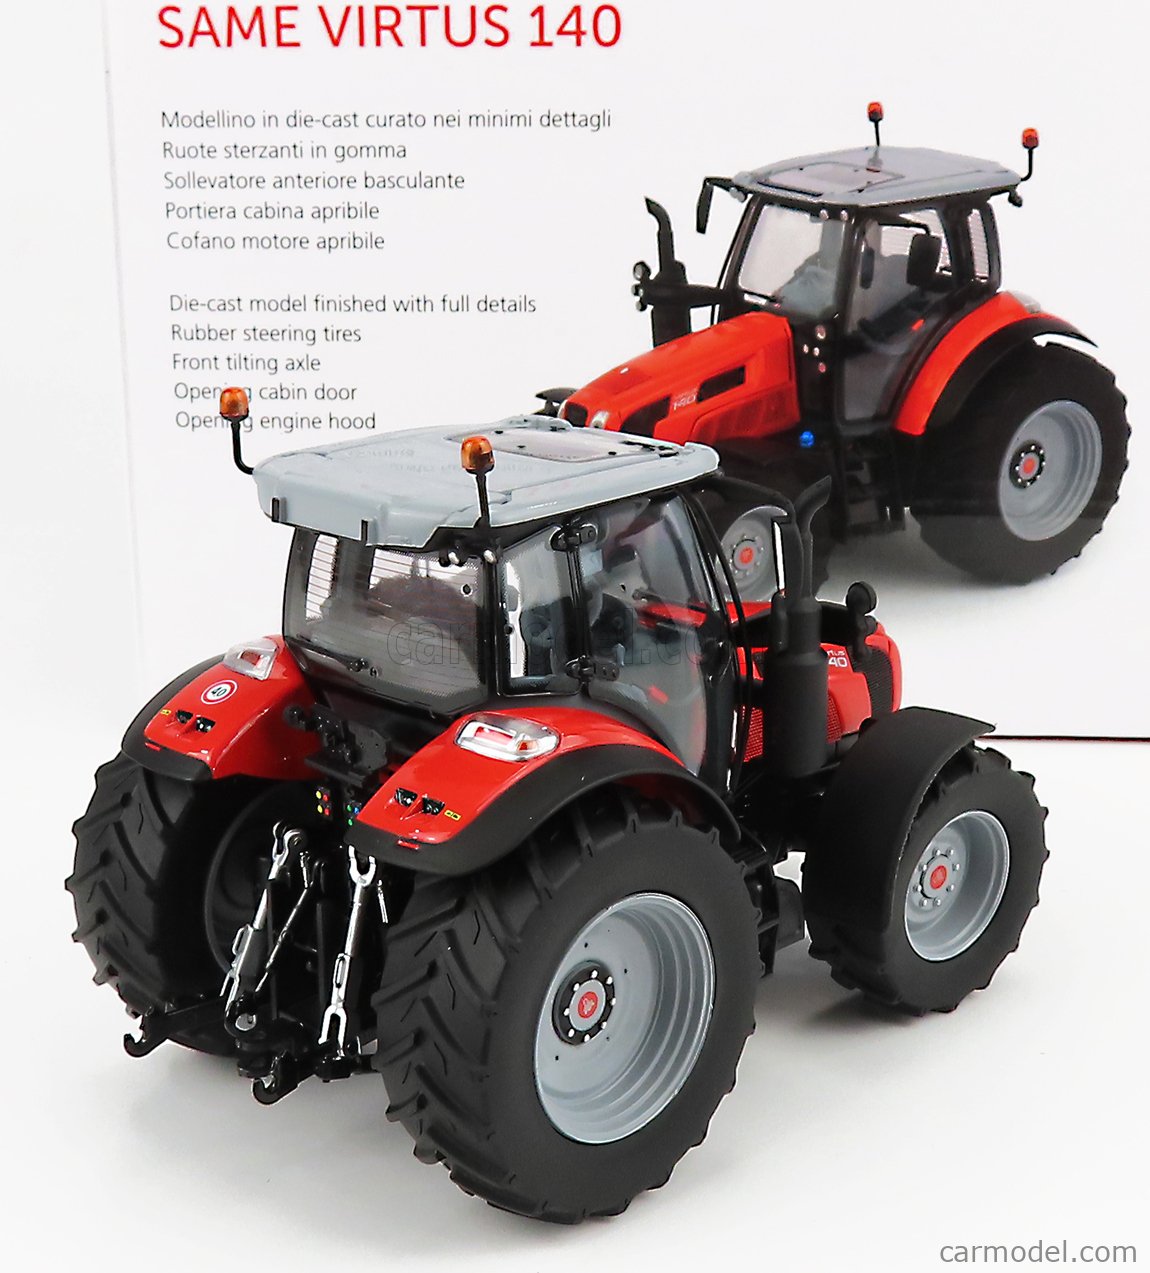 ROS-MODEL 301993 Scale 1/32  SAME 140 VIRTUS TRACTOR 2016 RED BLACK